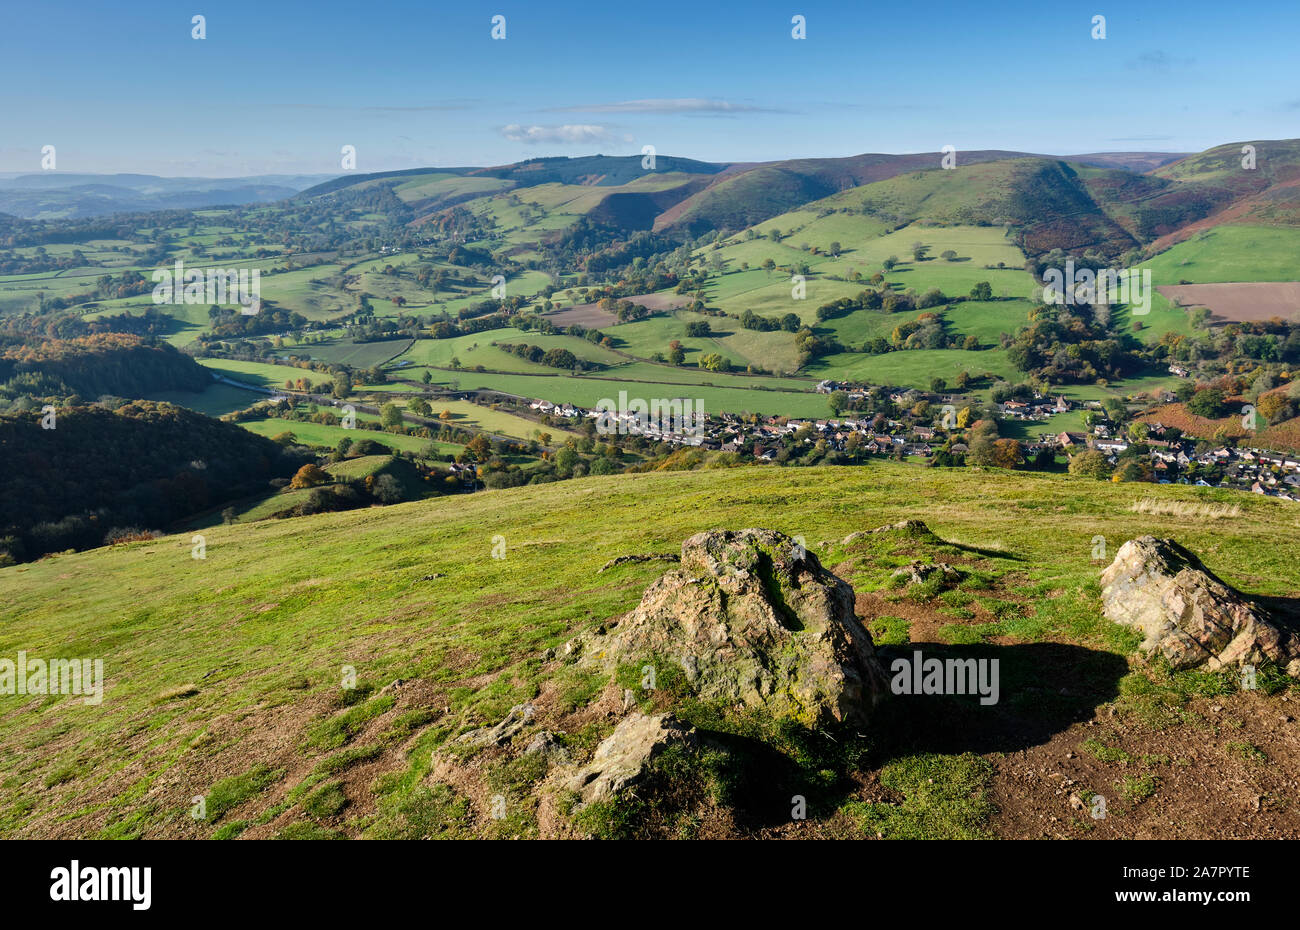 Minton, Minton Hill and Ashes Hollow on the Long Mynd, seen from Ragleth Hill, Church Stretton, Shropshire Stock Photo